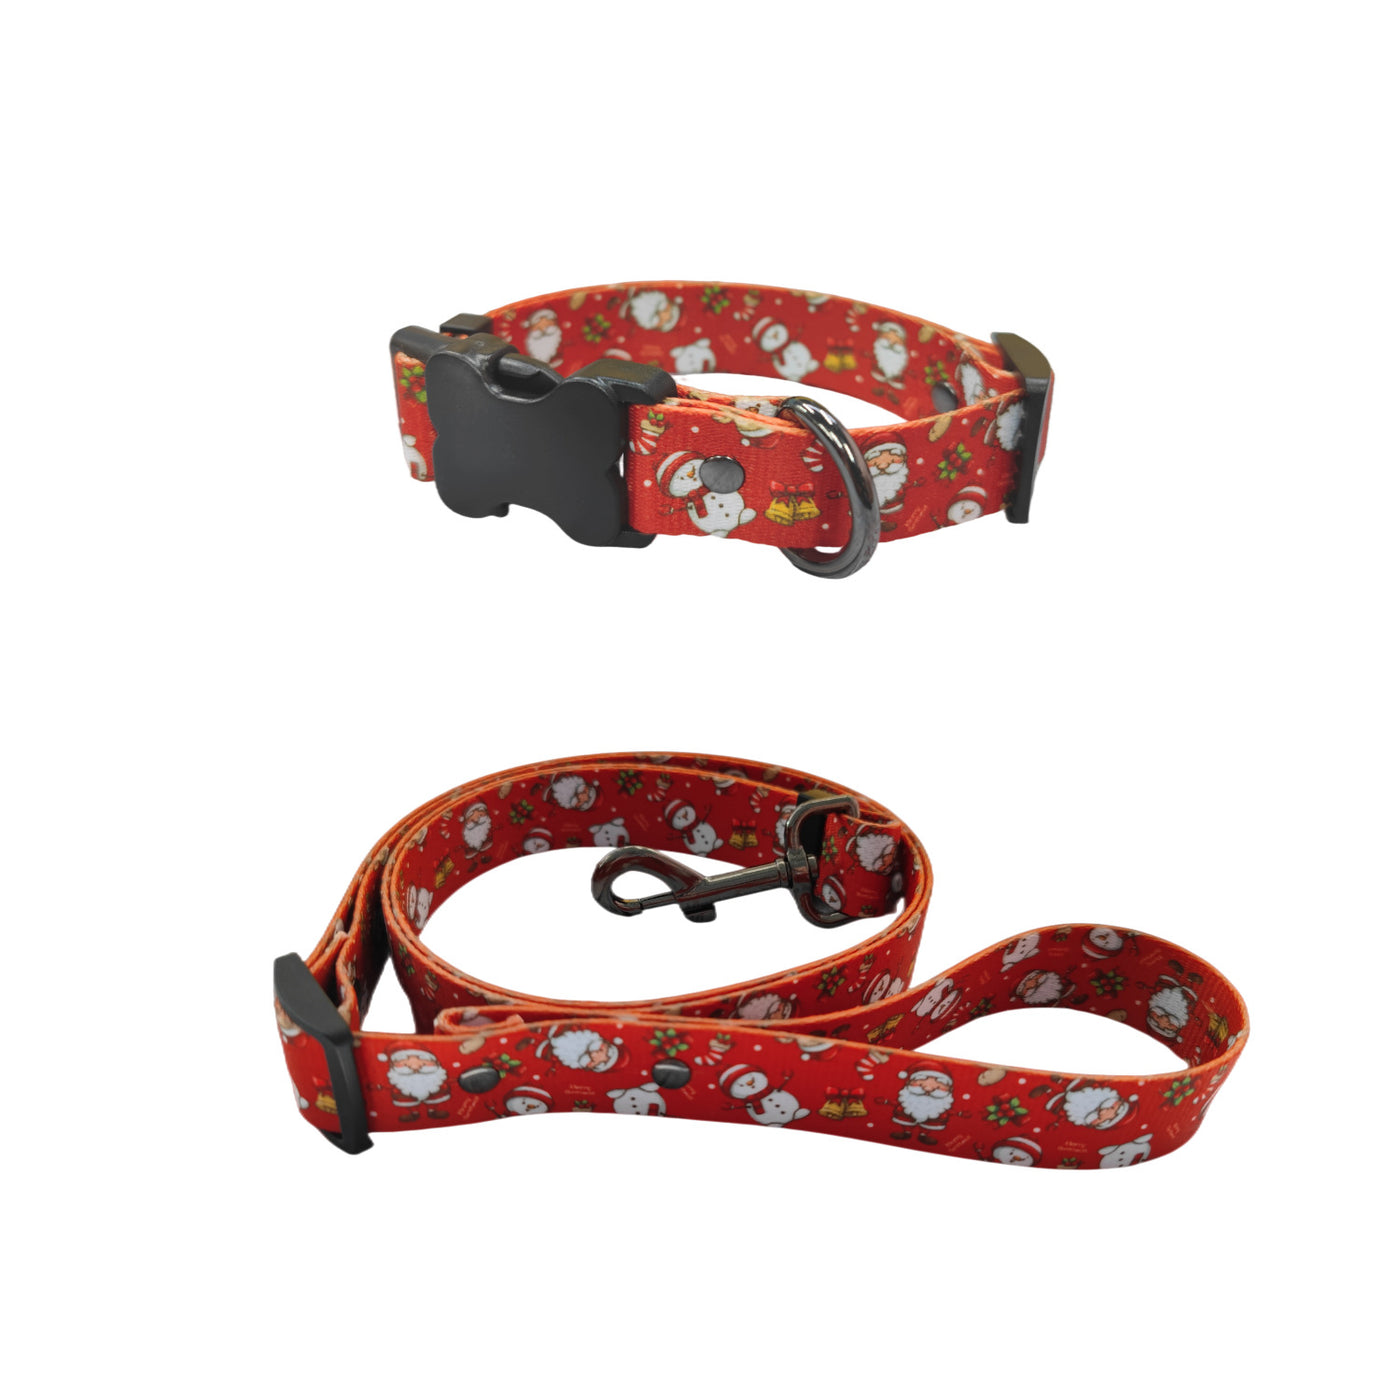 Durable Christmas Dog Leash Chest Harness Pet for adventure